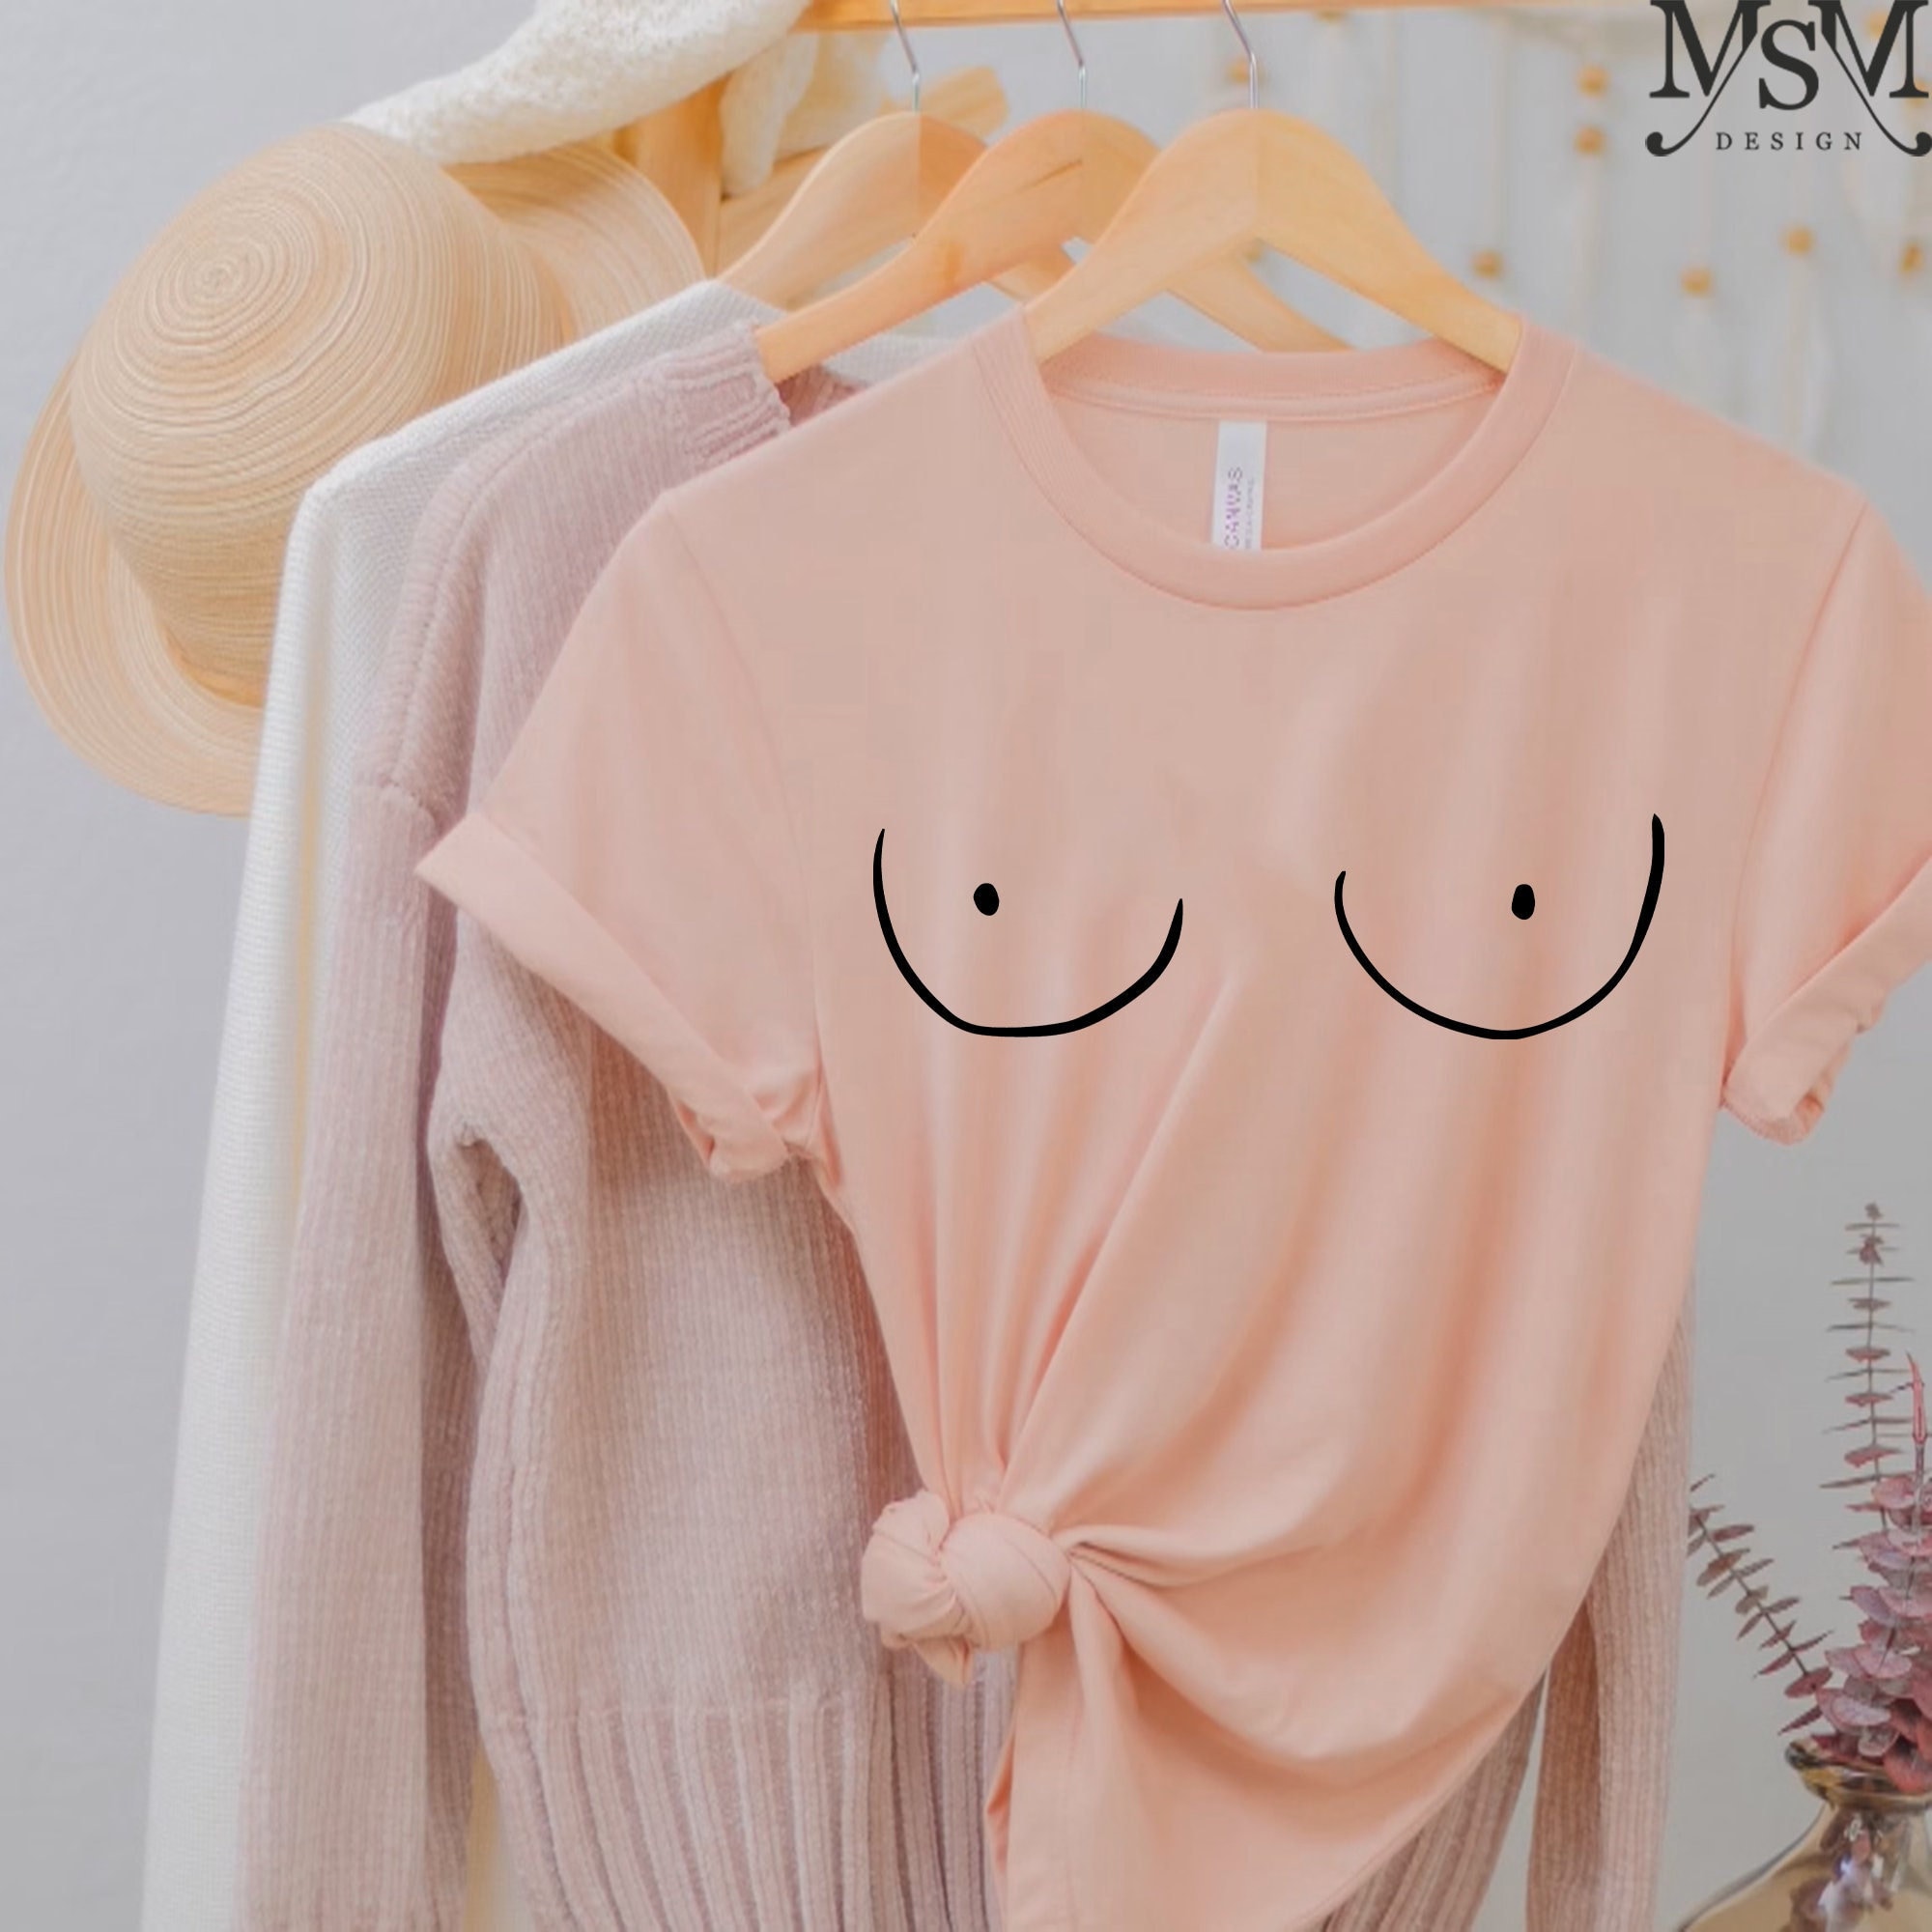 Funny Boobs 100% Cotton T-shirt Casual Women's Rights Feminist Tshirt  Summer O-neck Graphic Tities Top Tee Shirt Dropshipping - T-shirts -  AliExpress